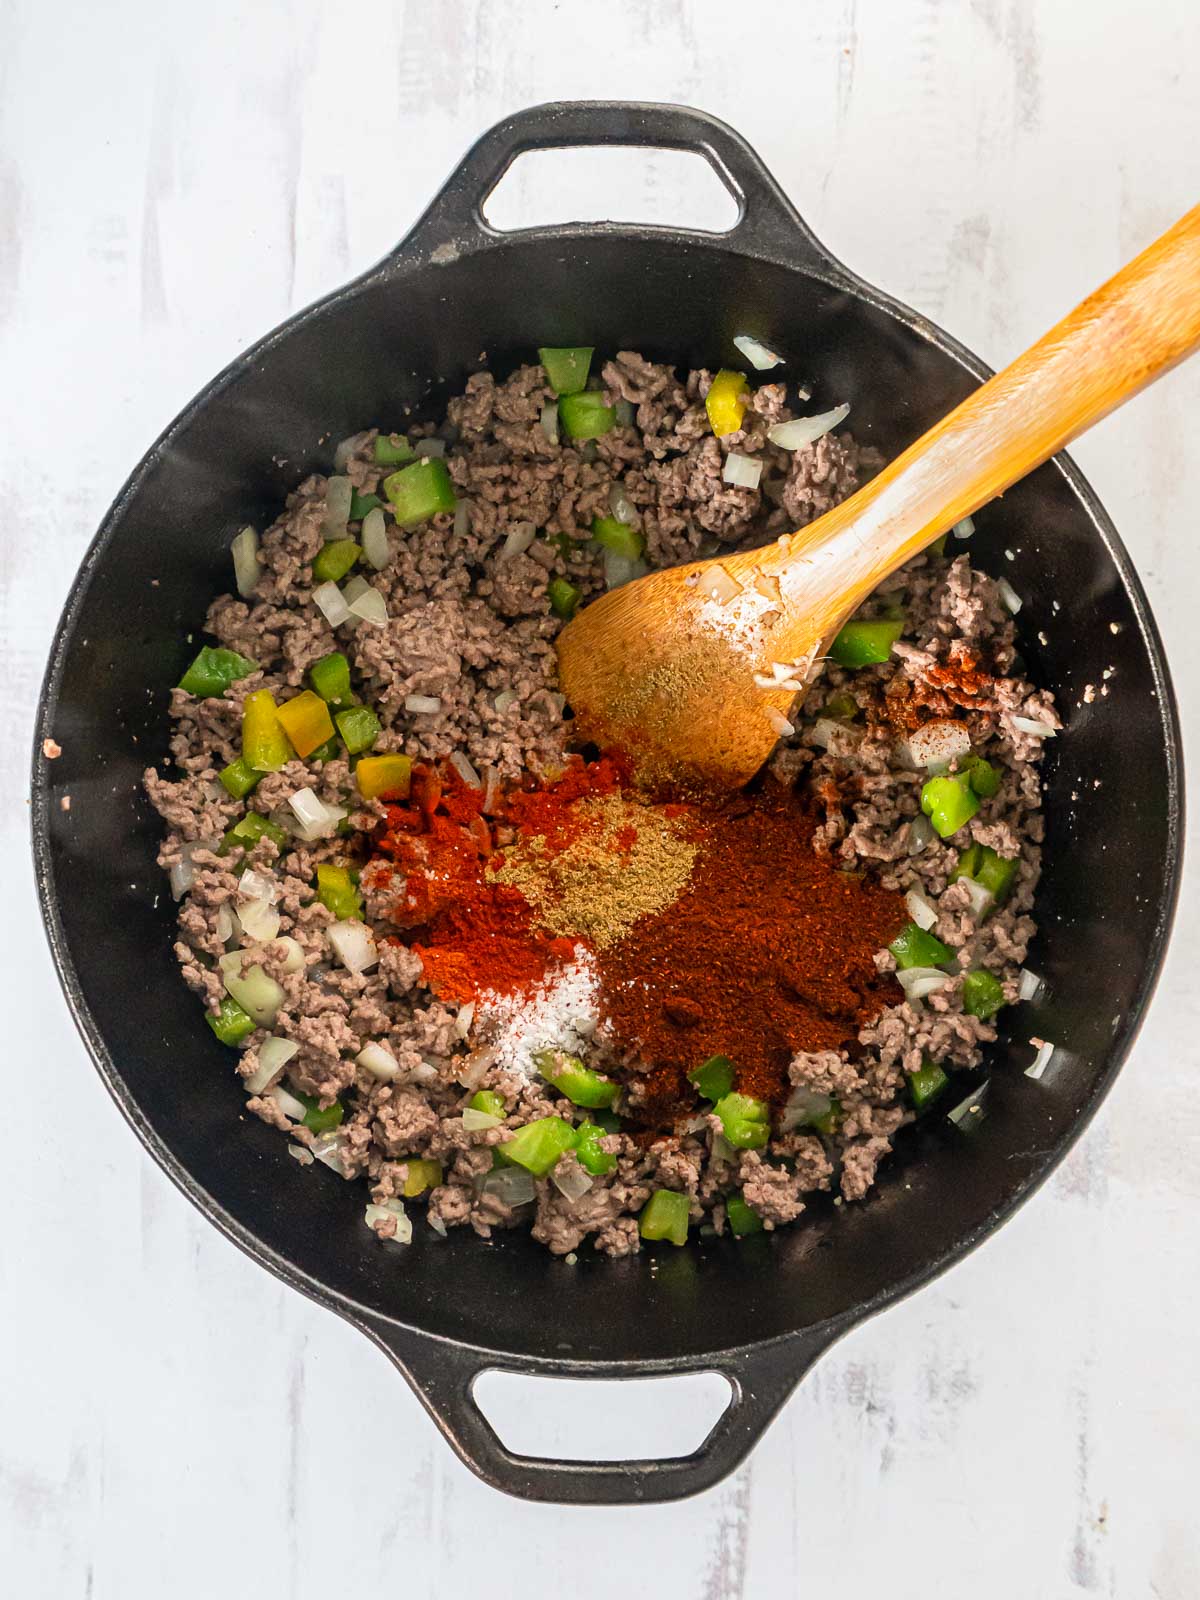 Sauteed ground beef and vegetables topped with ground cumin, chili, garlic powder, and salt.